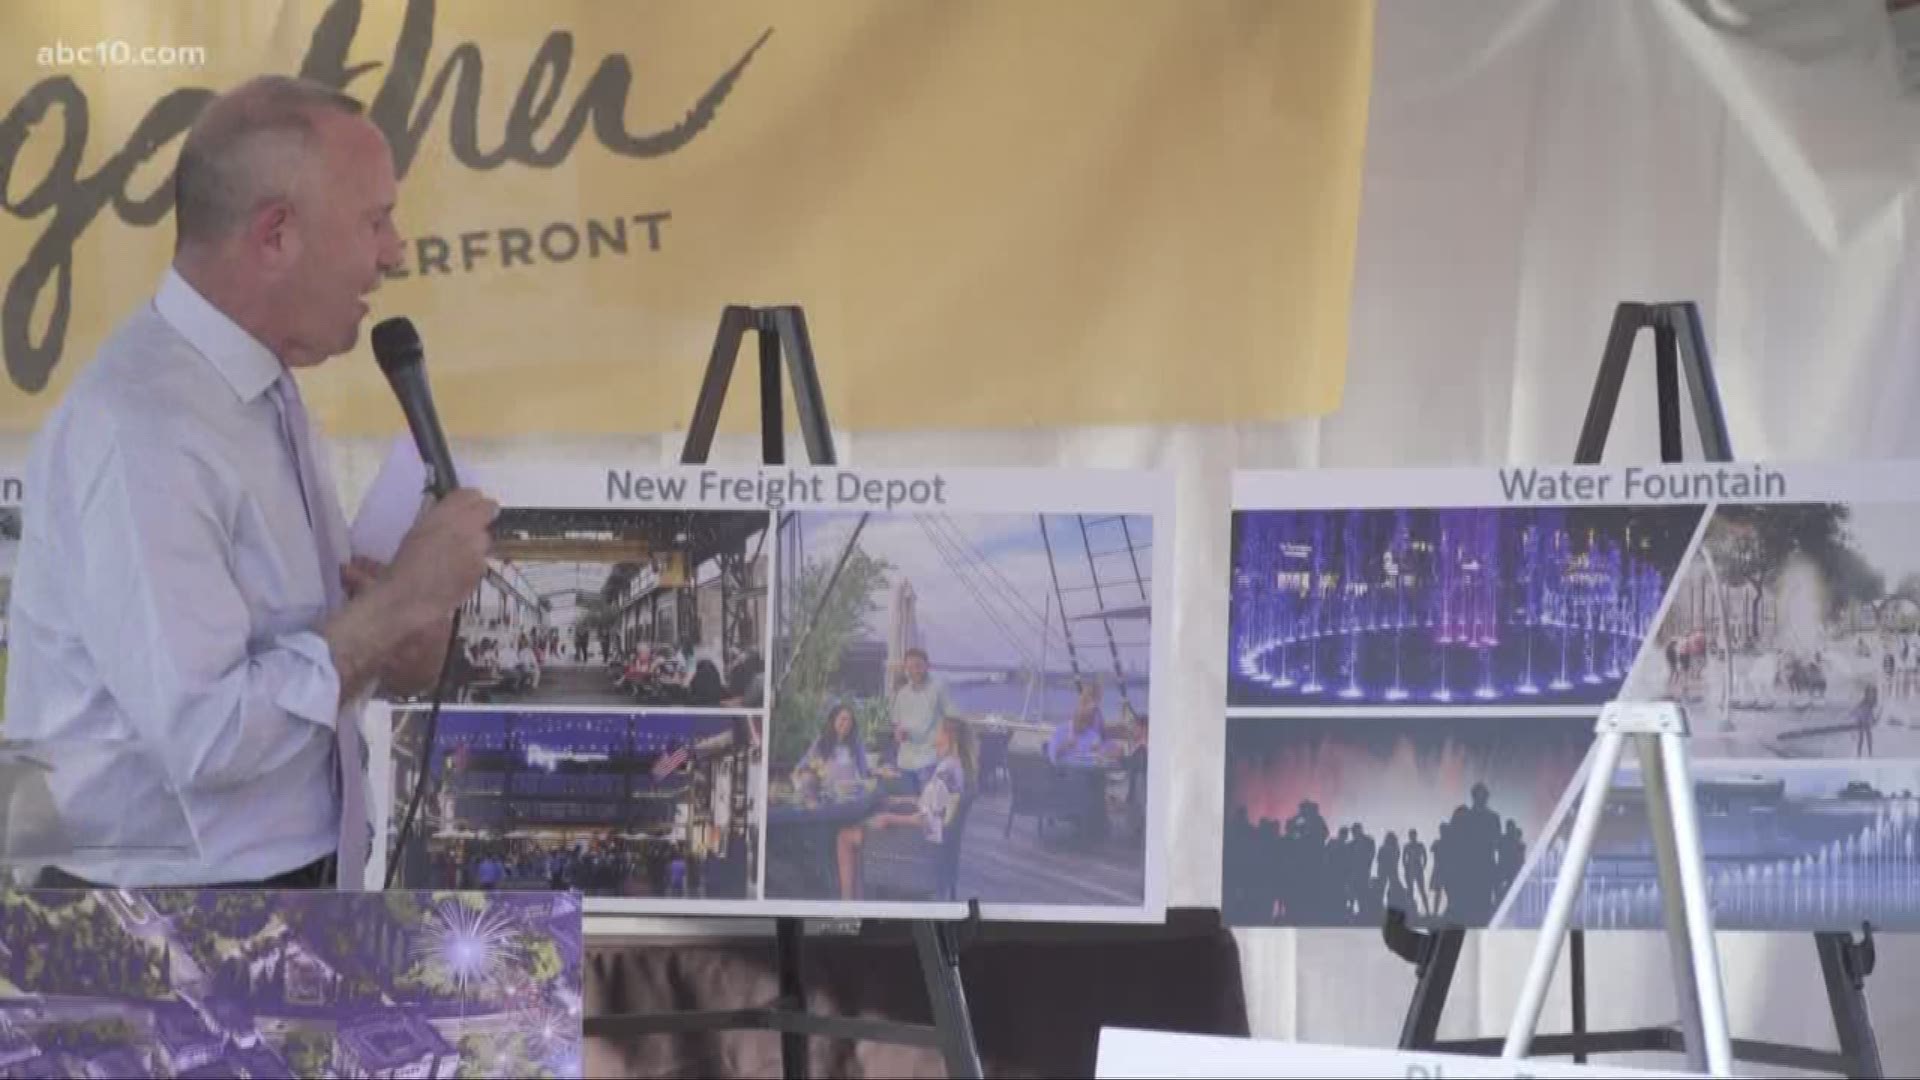 Sacramento Mayor Darrell Steinberg unveiled plans to redevelop the Old Sacramento Waterfront.